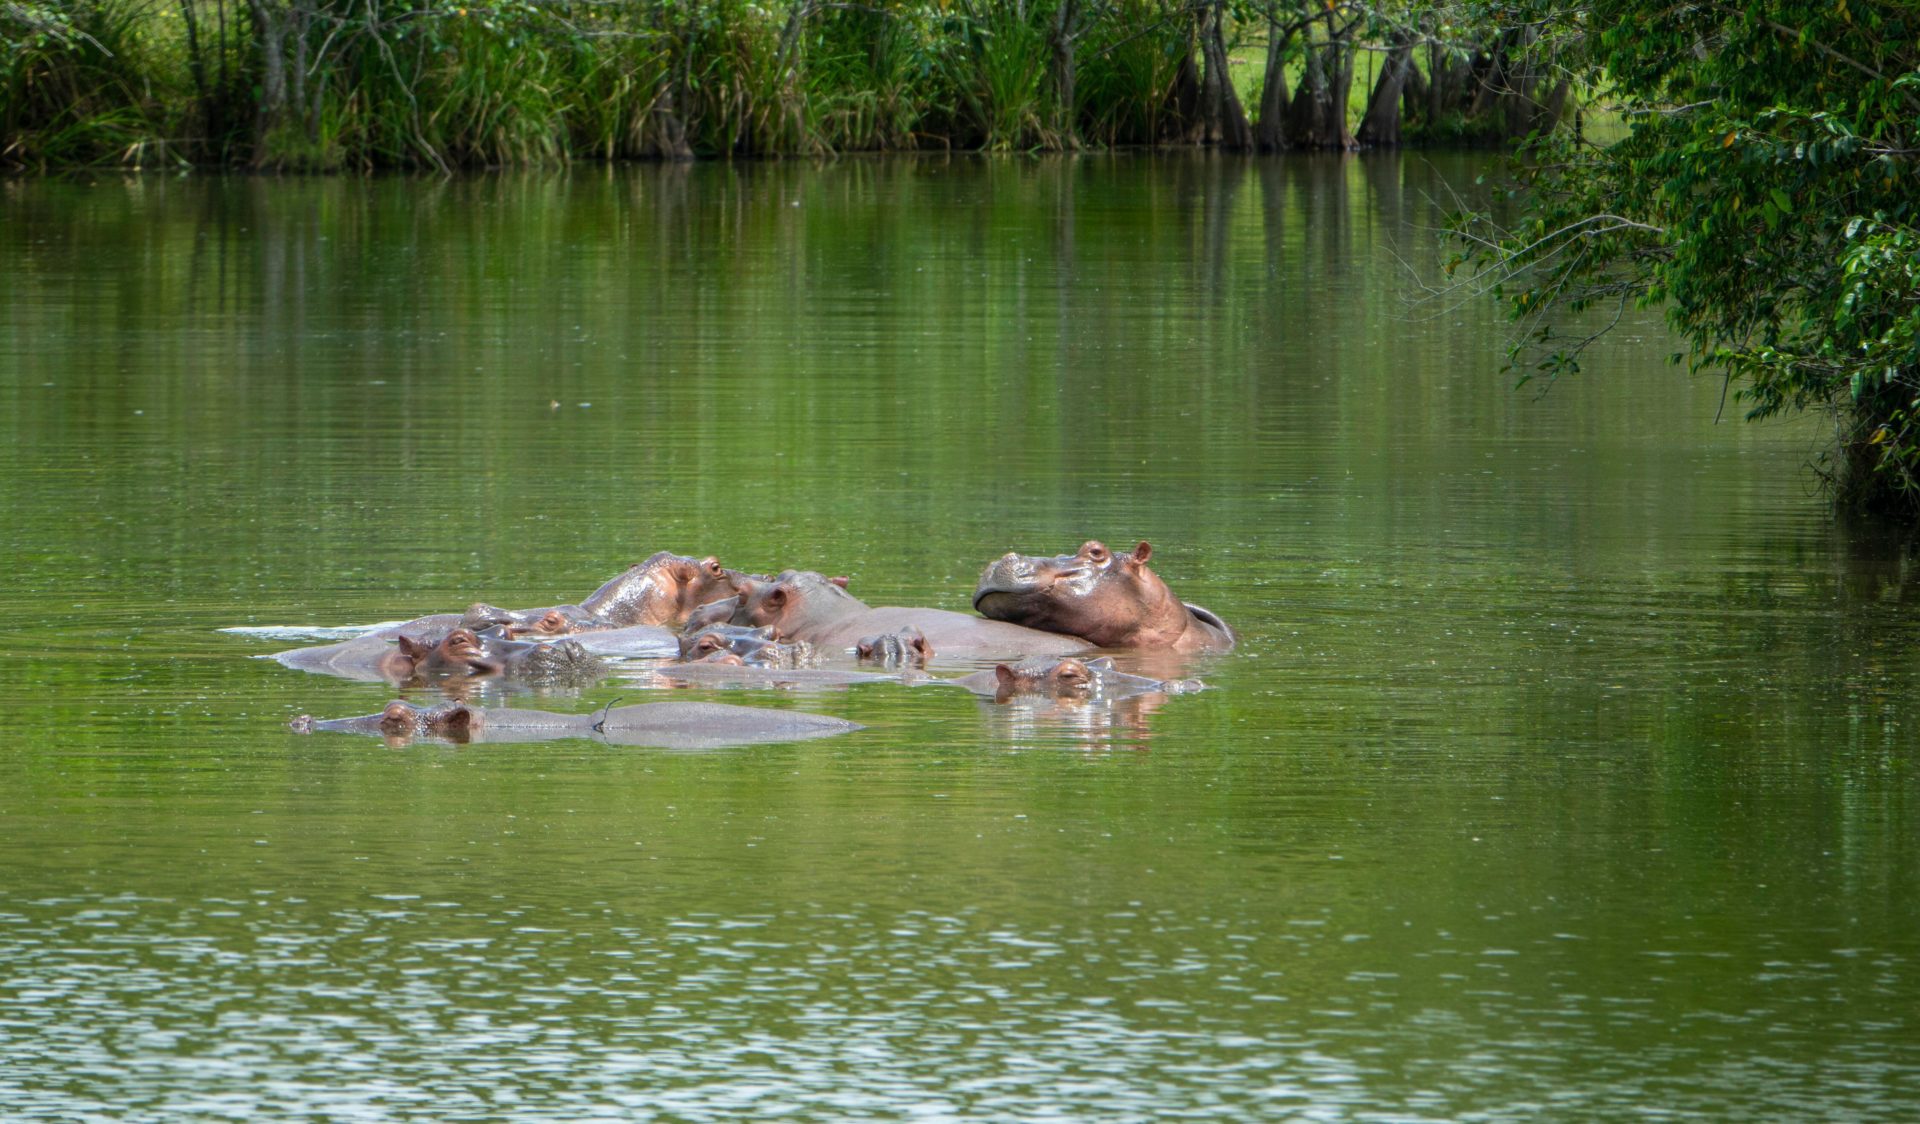 Herd of Hippopotamuses in Colombia, these animals were introduced in the '70s by Pablo Escobar